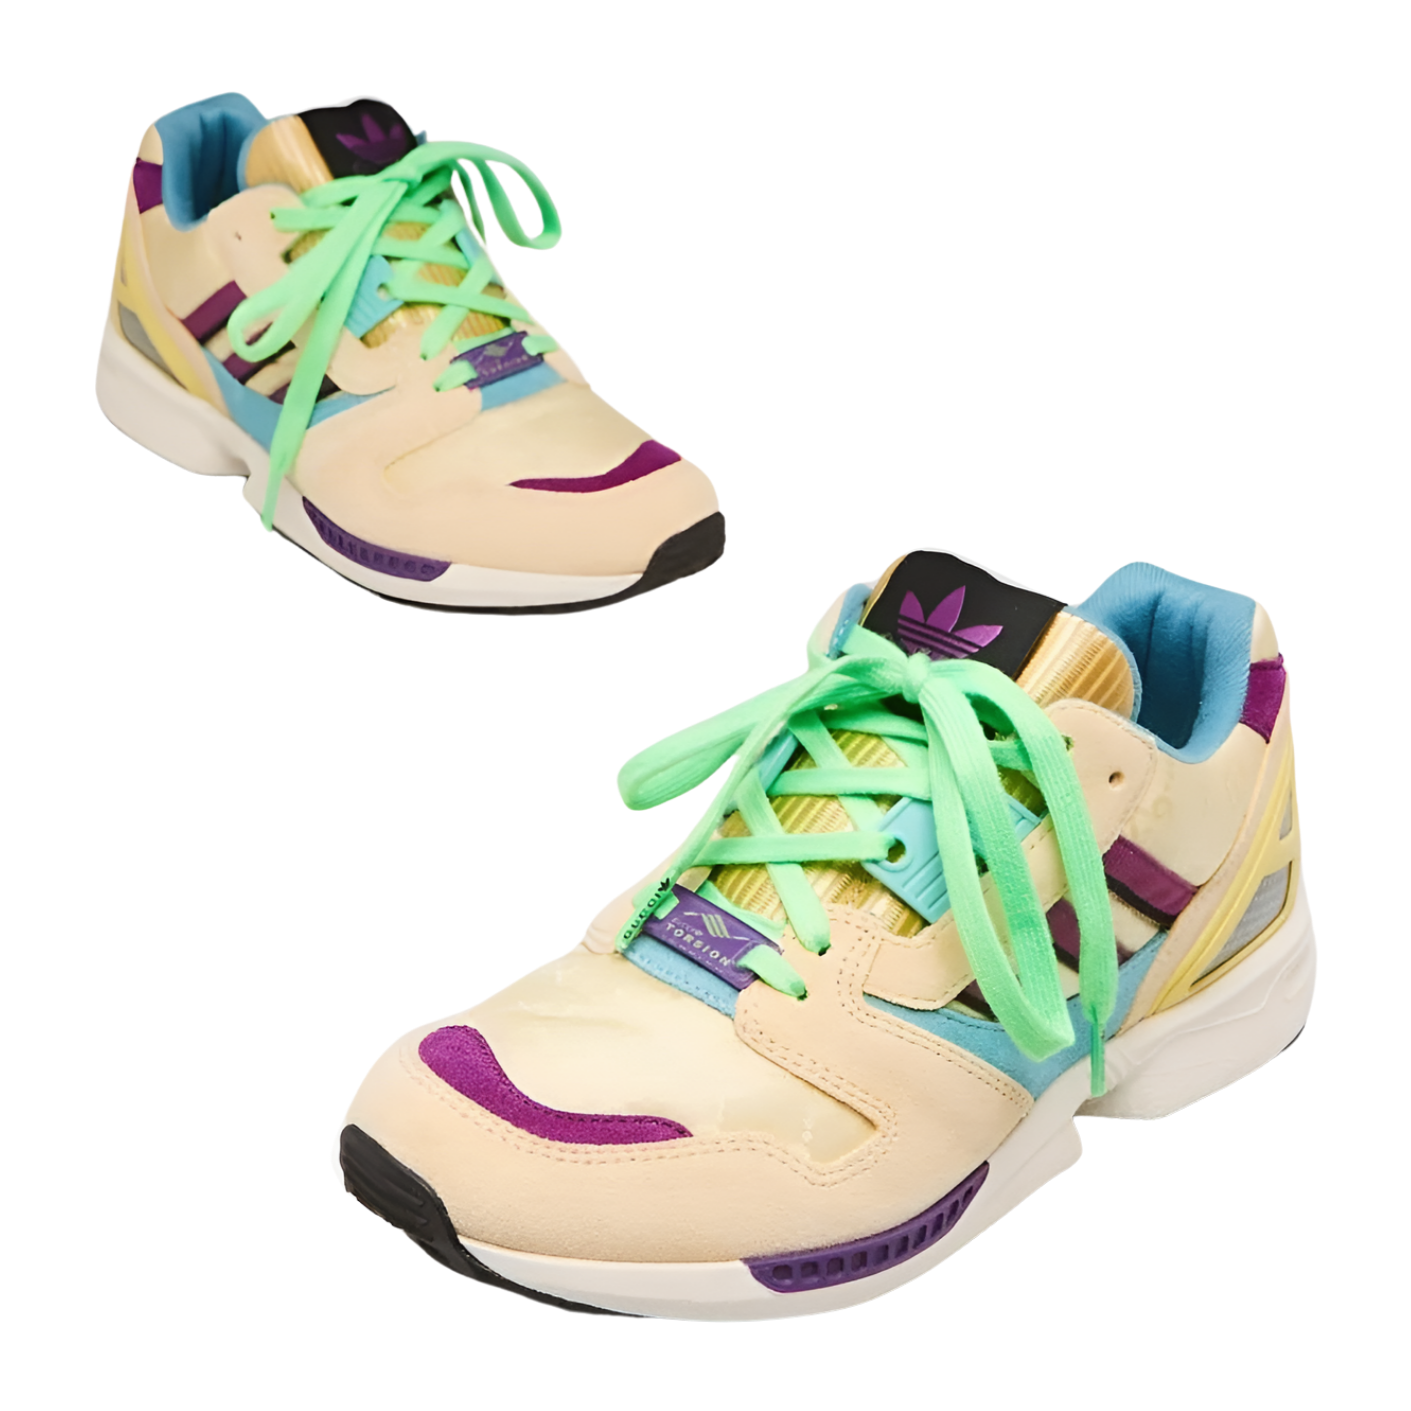 Women's Beige and Purple ZX8000 Sneakers – Wow Me More